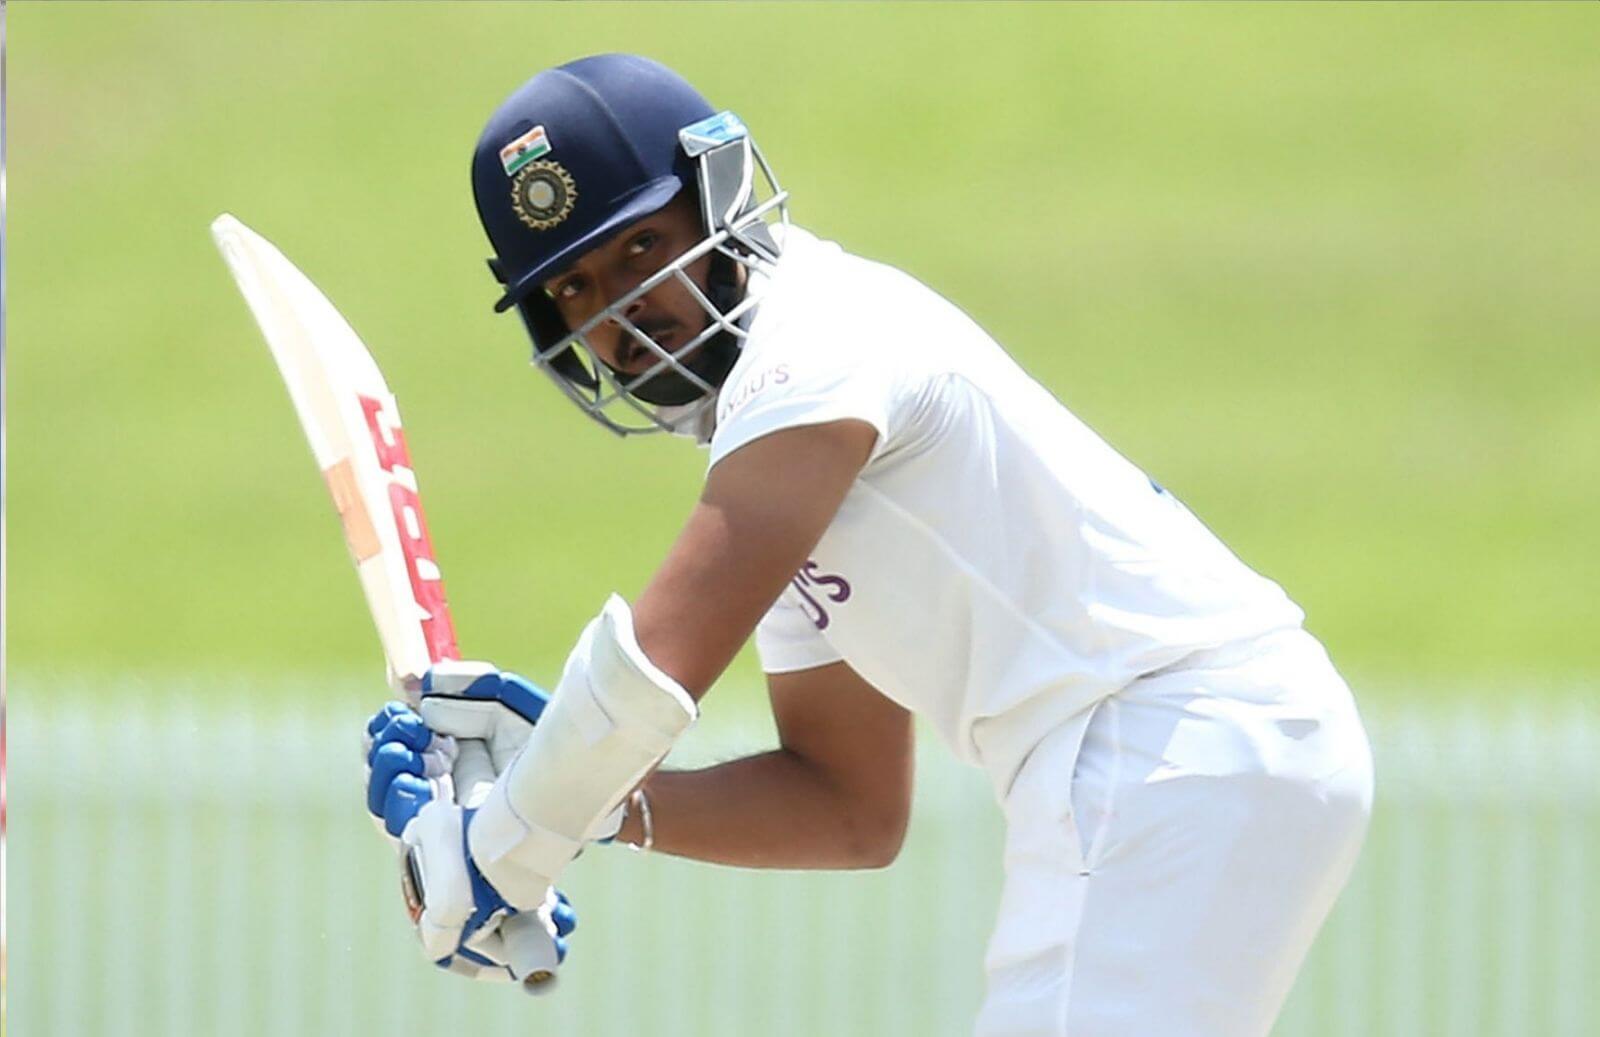 IND vs AUS 1st Test: Prithvi Shaw Out For 4 In 2nd Innings, Nightmare Batting Form Continues